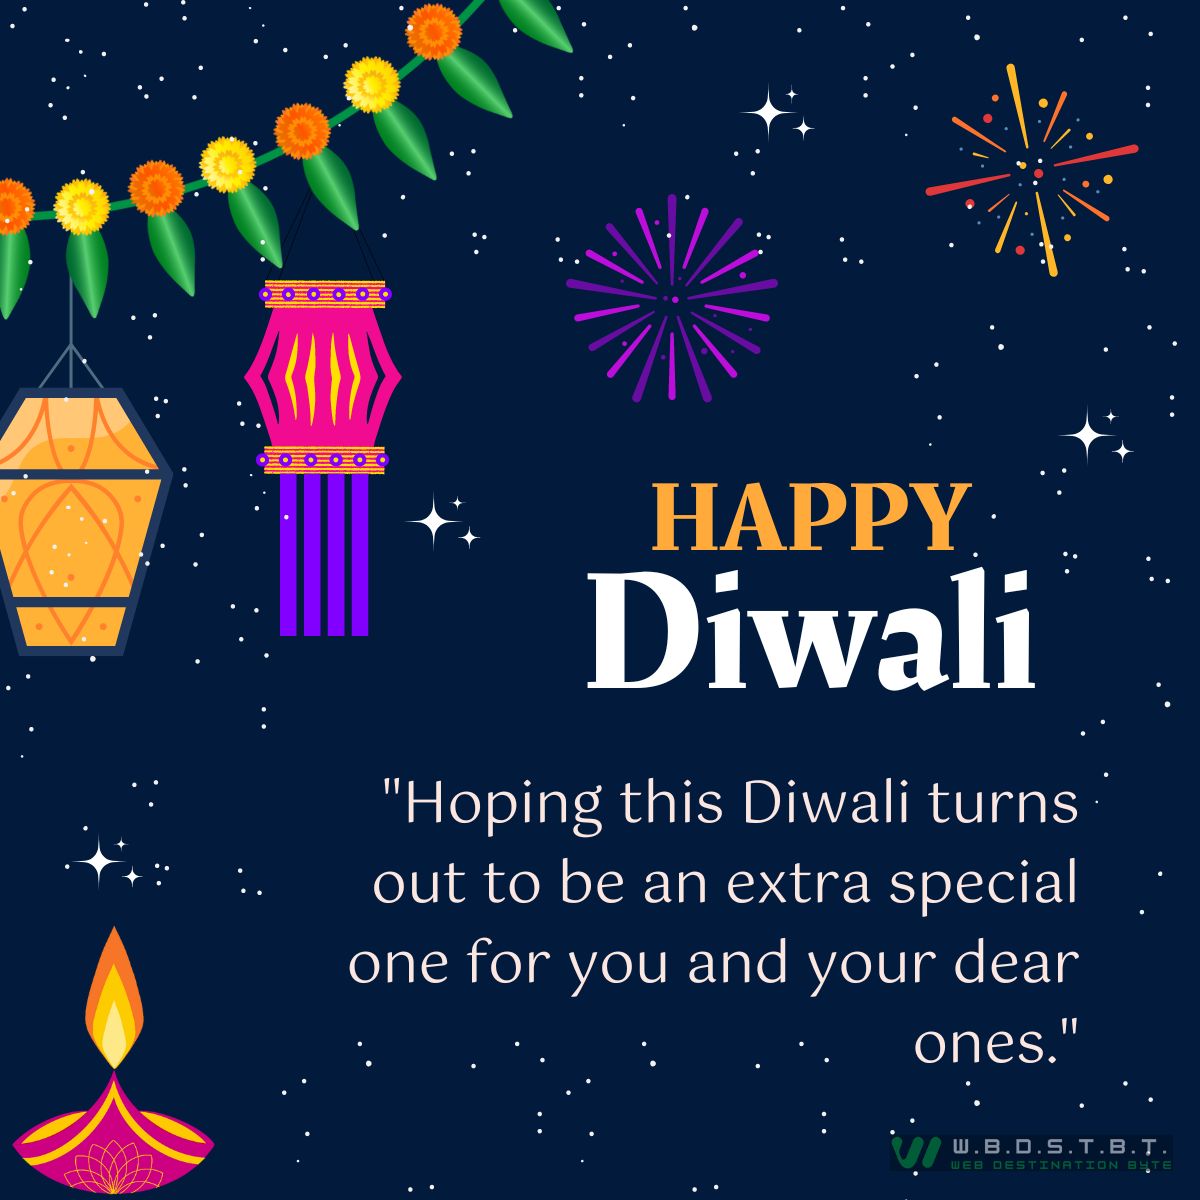 "Hoping this Diwali turns out to be an extra special one for you and your dear ones."